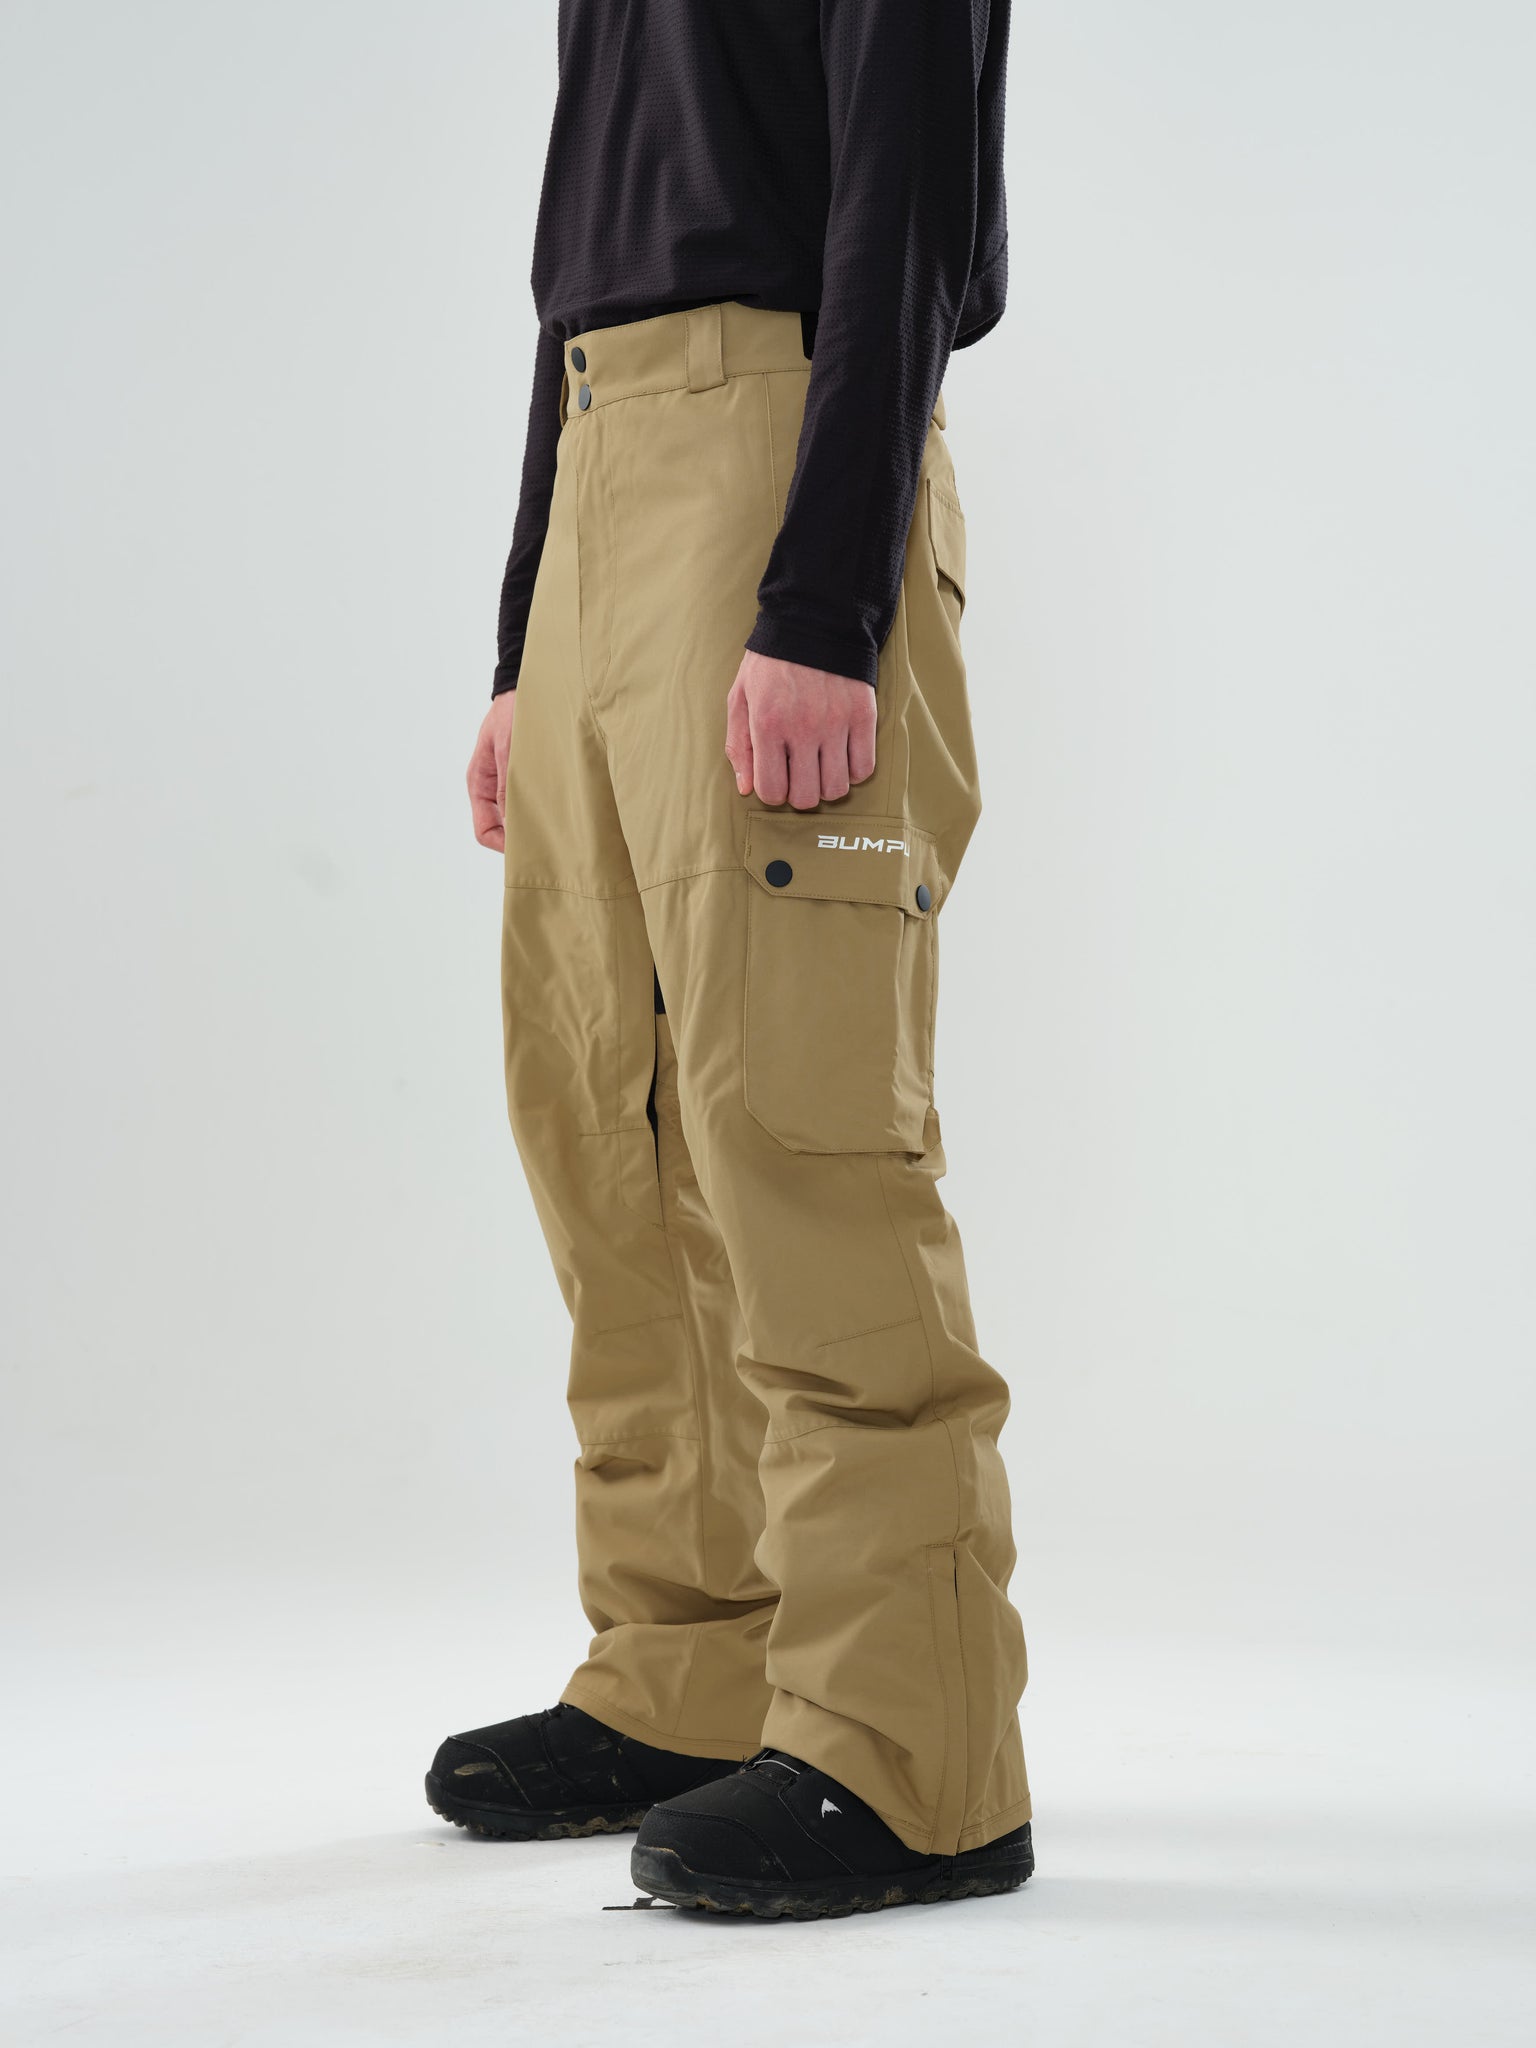 Quiksilver Porter Insulated Pant - Men's - Clothing